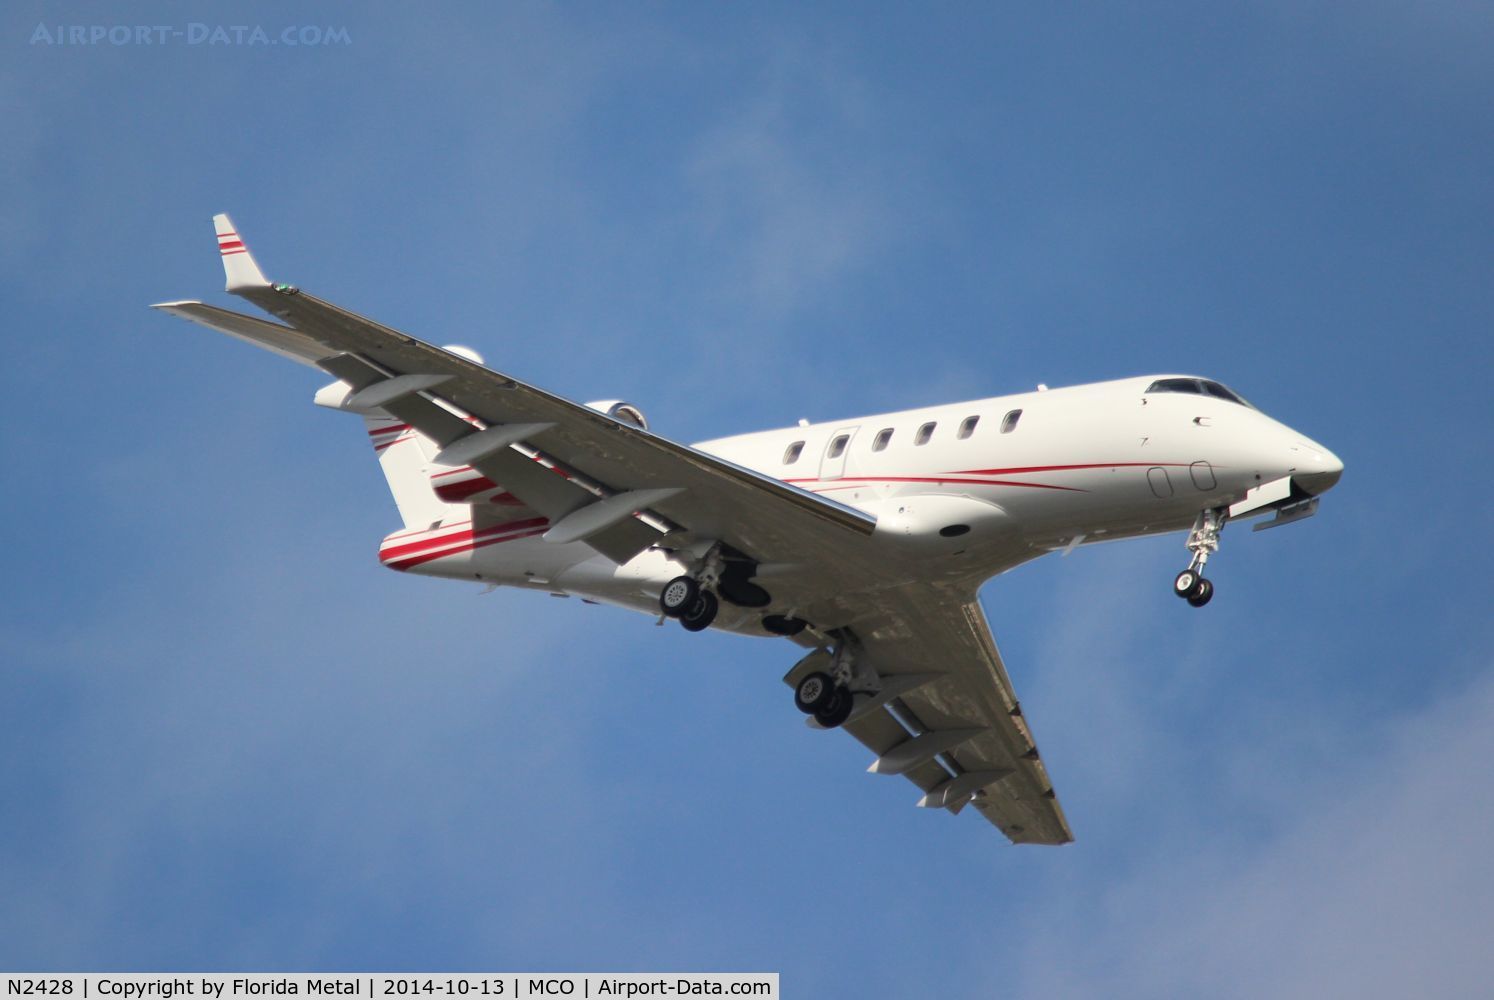 N2428, 2013 Bombardier Challenger 300 (BD-100-1A10) C/N 20414, Challenger 300